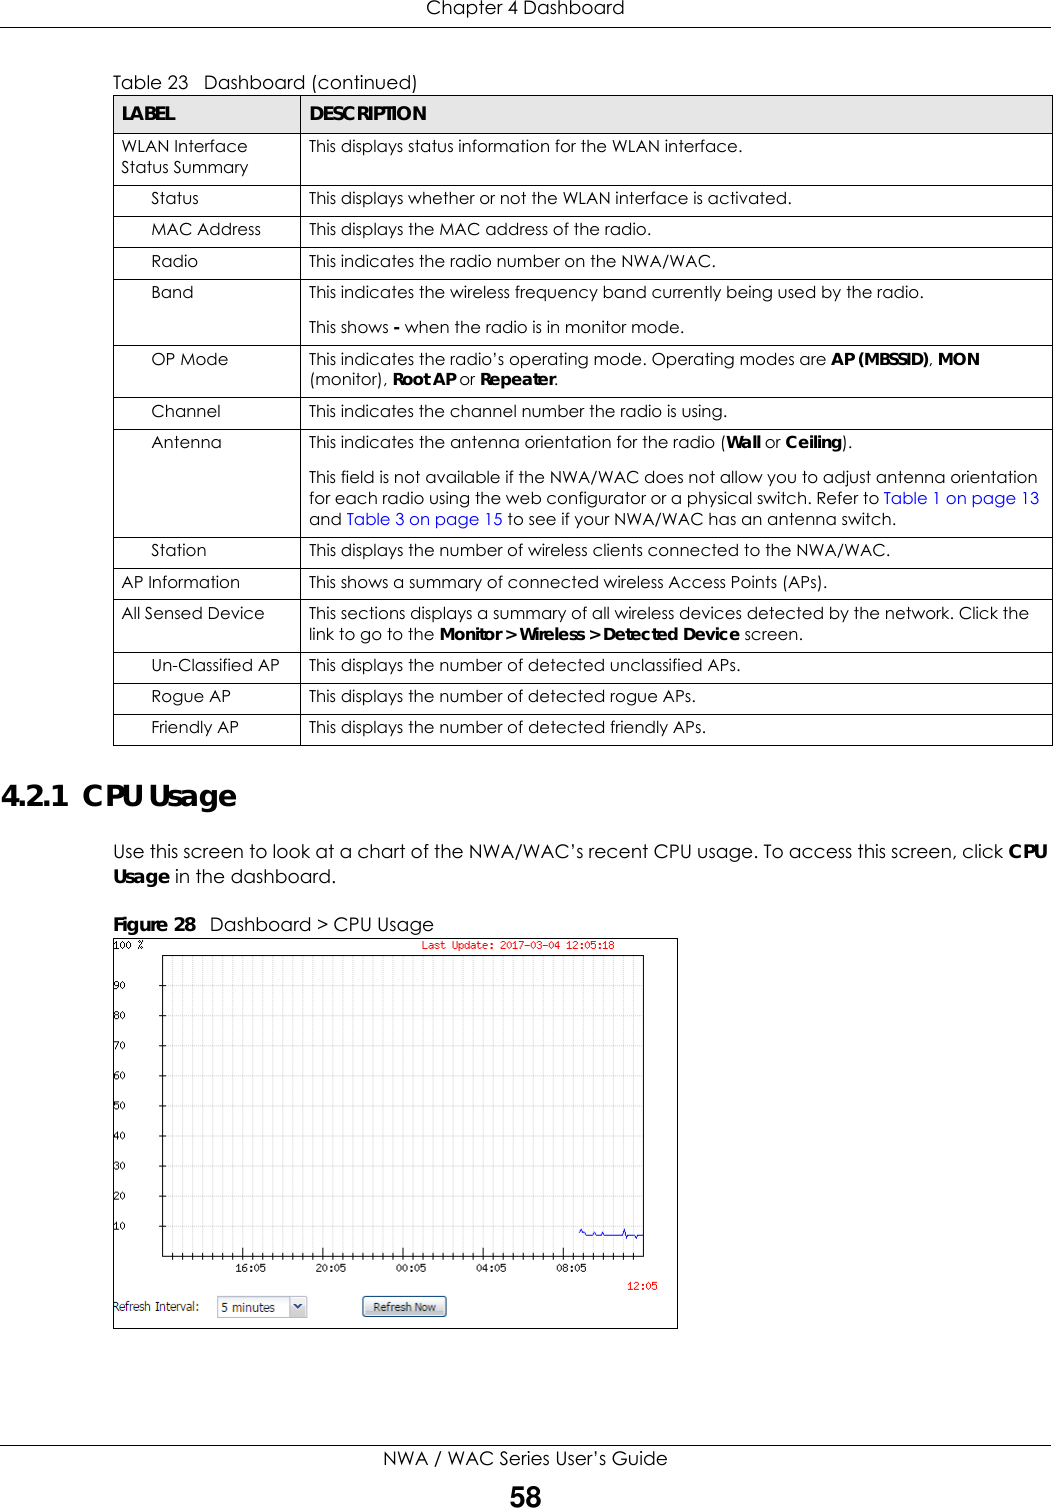 Chapter 4 DashboardNWA / WAC Series User’s Guide584.2.1  CPU UsageUse this screen to look at a chart of the NWA/WAC’s recent CPU usage. To access this screen, click CPU Usage in the dashboard.Figure 28   Dashboard &gt; CPU UsageWLAN Interface Status SummaryThis displays status information for the WLAN interface.Status This displays whether or not the WLAN interface is activated.MAC Address This displays the MAC address of the radio.Radio This indicates the radio number on the NWA/WAC.Band This indicates the wireless frequency band currently being used by the radio. This shows - when the radio is in monitor mode.OP Mode This indicates the radio’s operating mode. Operating modes are AP (MBSSID), MON (monitor), Root AP or Repeater.Channel This indicates the channel number the radio is using.Antenna This indicates the antenna orientation for the radio (Wall or Ceiling).This field is not available if the NWA/WAC does not allow you to adjust antenna orientation for each radio using the web configurator or a physical switch. Refer to Table 1 on page 13 and Table 3 on page 15 to see if your NWA/WAC has an antenna switch.Station This displays the number of wireless clients connected to the NWA/WAC.AP Information This shows a summary of connected wireless Access Points (APs). All Sensed Device This sections displays a summary of all wireless devices detected by the network. Click the link to go to the Monitor &gt; Wireless &gt; Detected Device screen.Un-Classified AP This displays the number of detected unclassified APs.Rogue AP This displays the number of detected rogue APs.Friendly AP This displays the number of detected friendly APs.Table 23   Dashboard (continued)LABEL DESCRIPTION